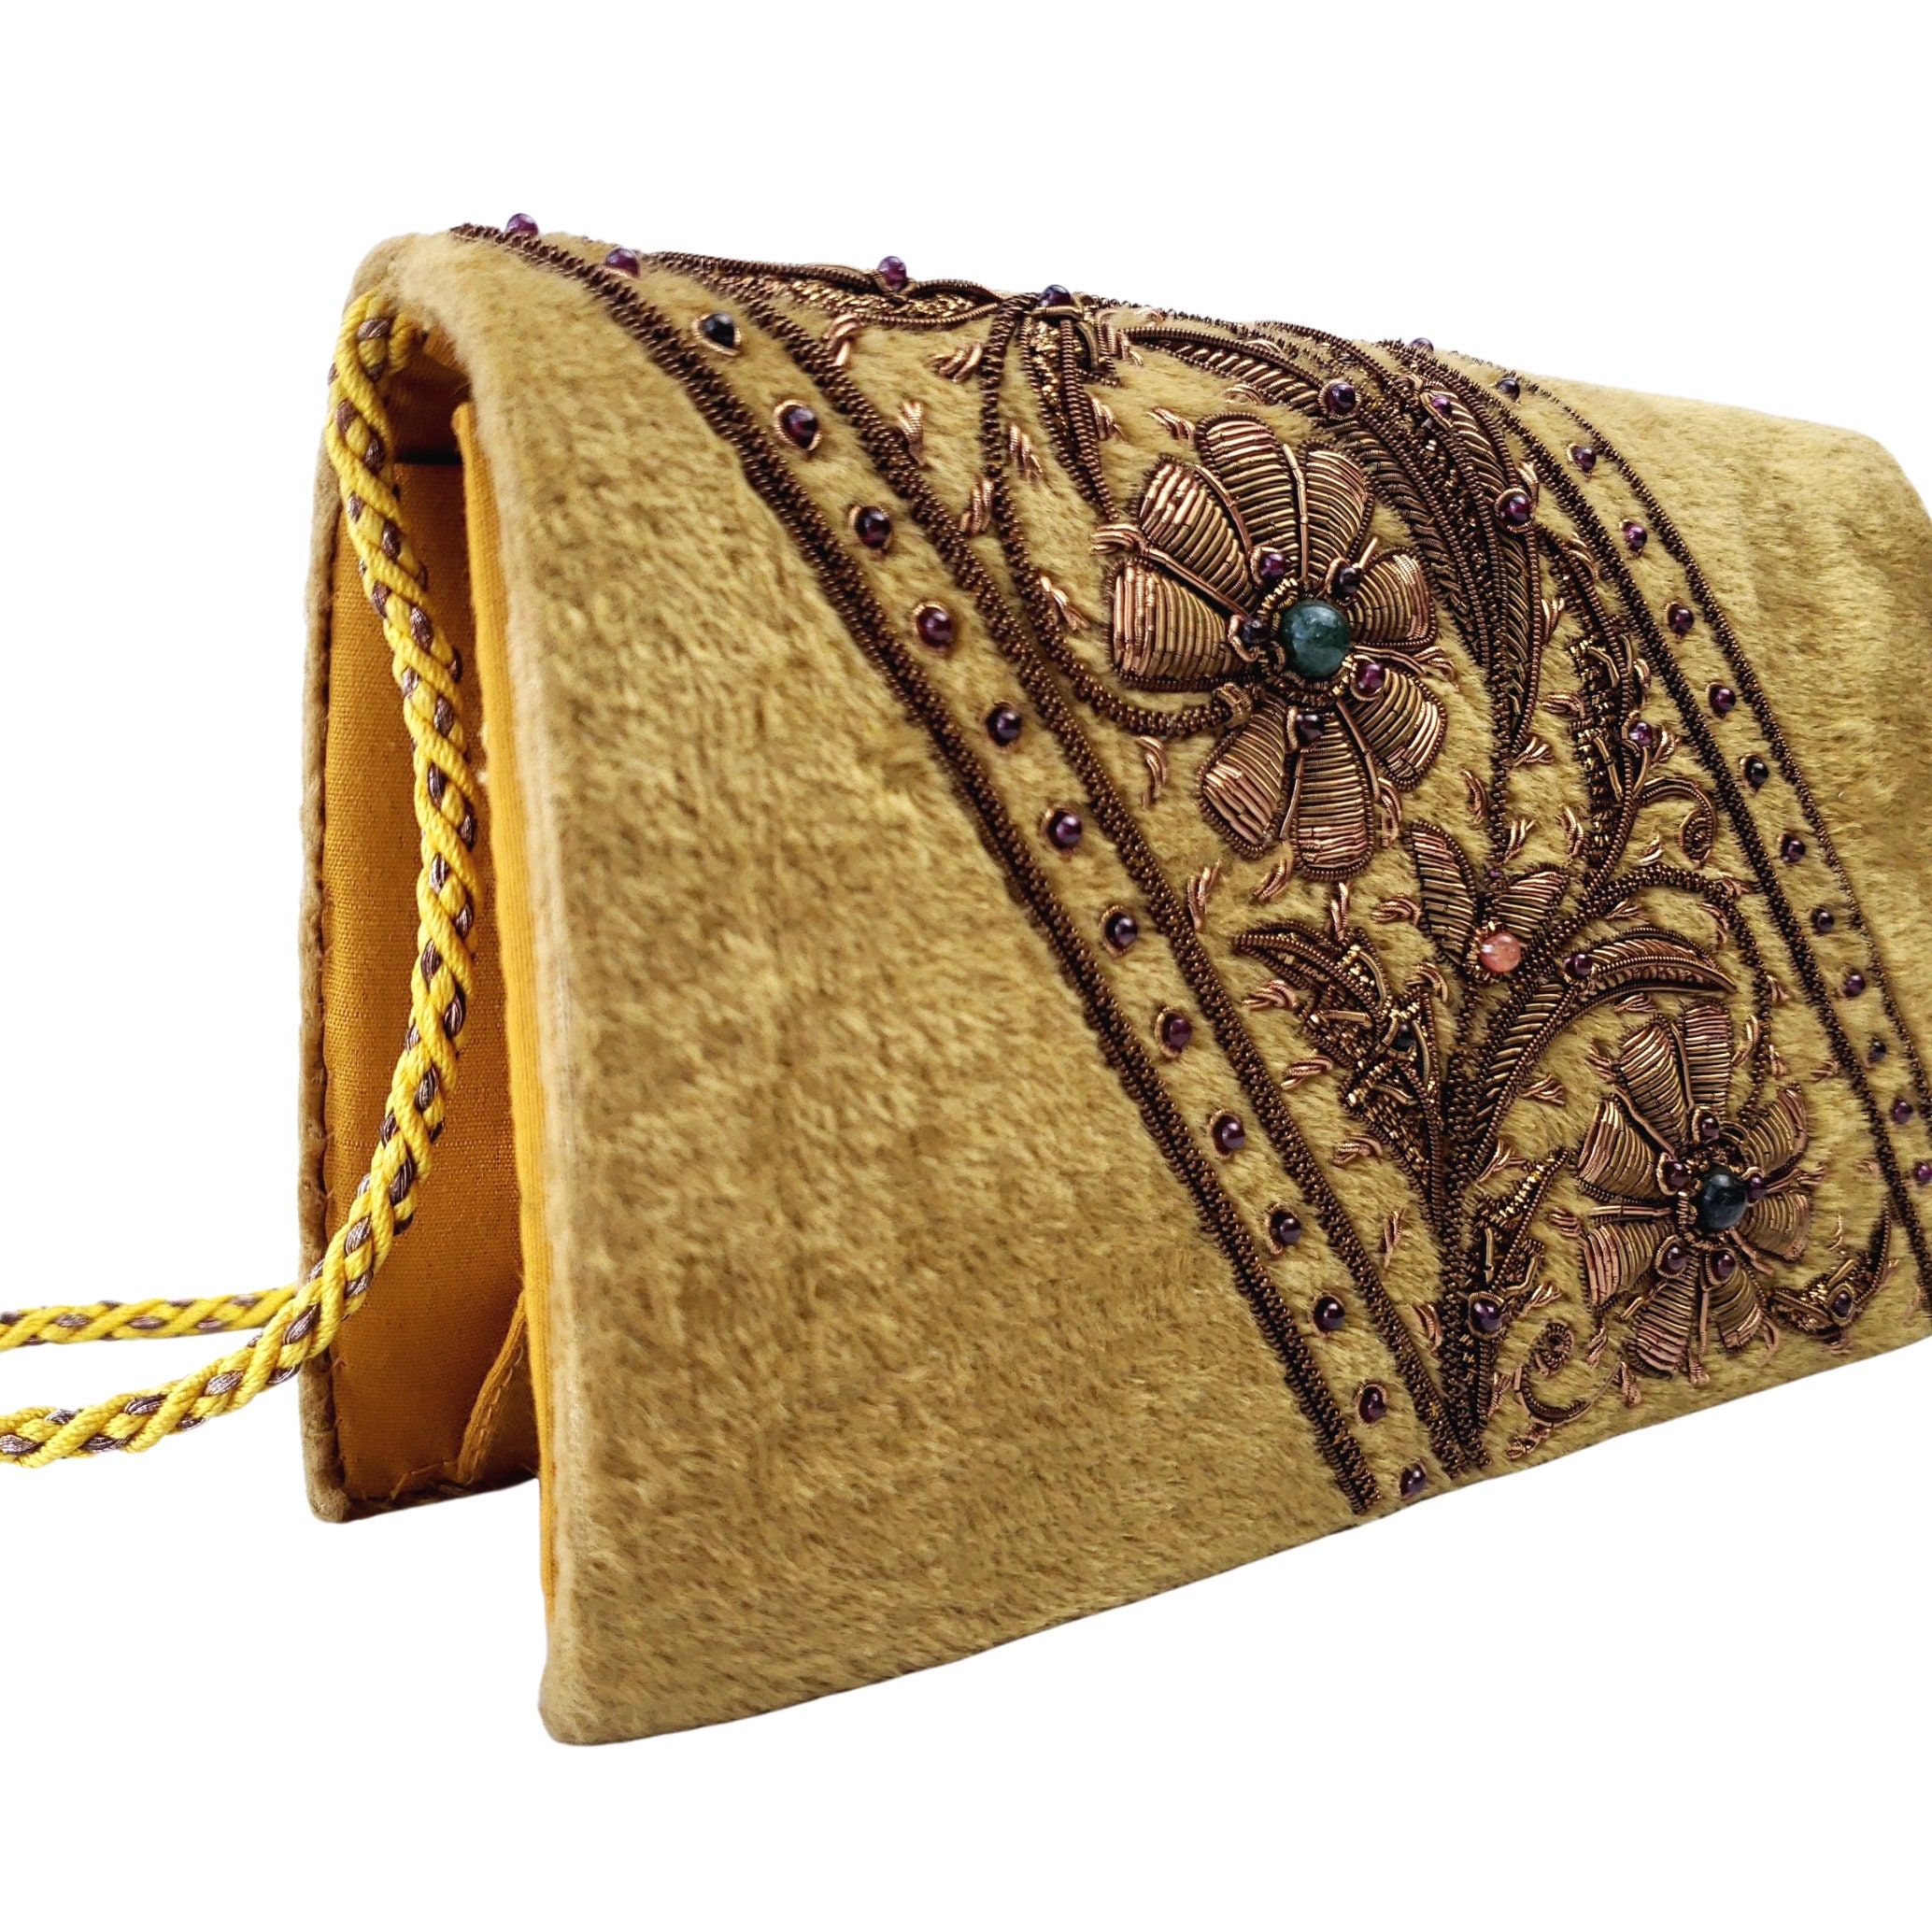 Handmade Embroidered Lovebirds Evening Clutch Bag in Gold by ABURY